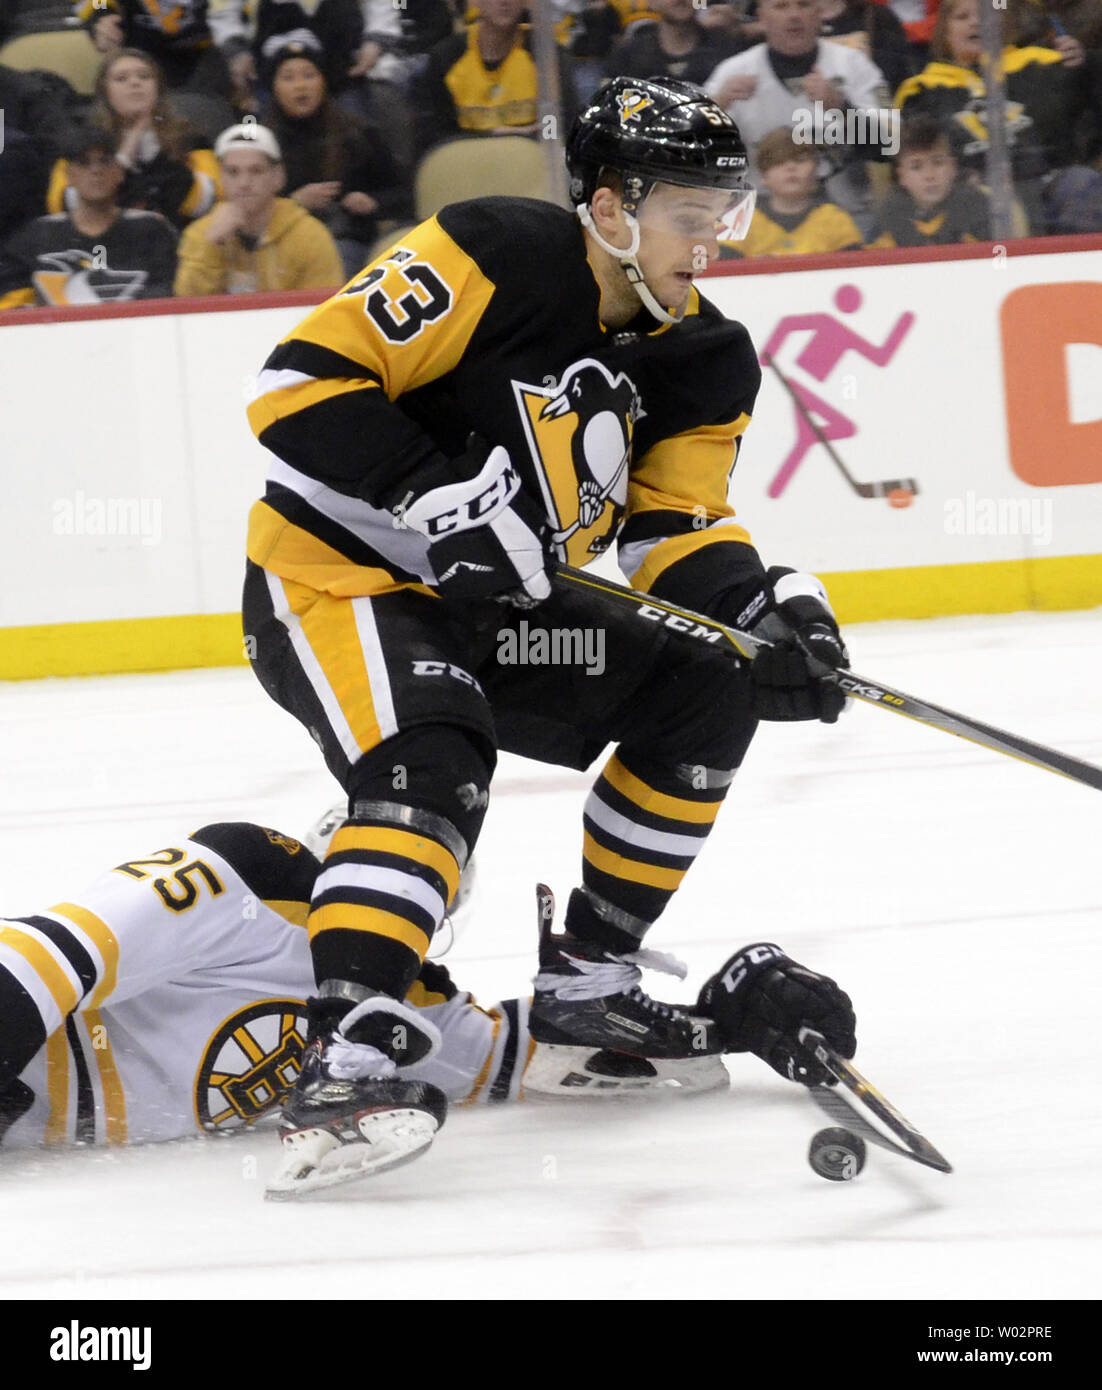 Boston Bruins defenseman Brandon Carlo (25) knocks the puck away from Pittsburgh Penguins center Teddy Blueger (53) but  receives a tripping penalty during the second period of the Pens 4-2 win at PPG Paints Arena in Pittsburgh on March 10, 2018.   Photo by Archie Carpenter/UPI Stock Photo